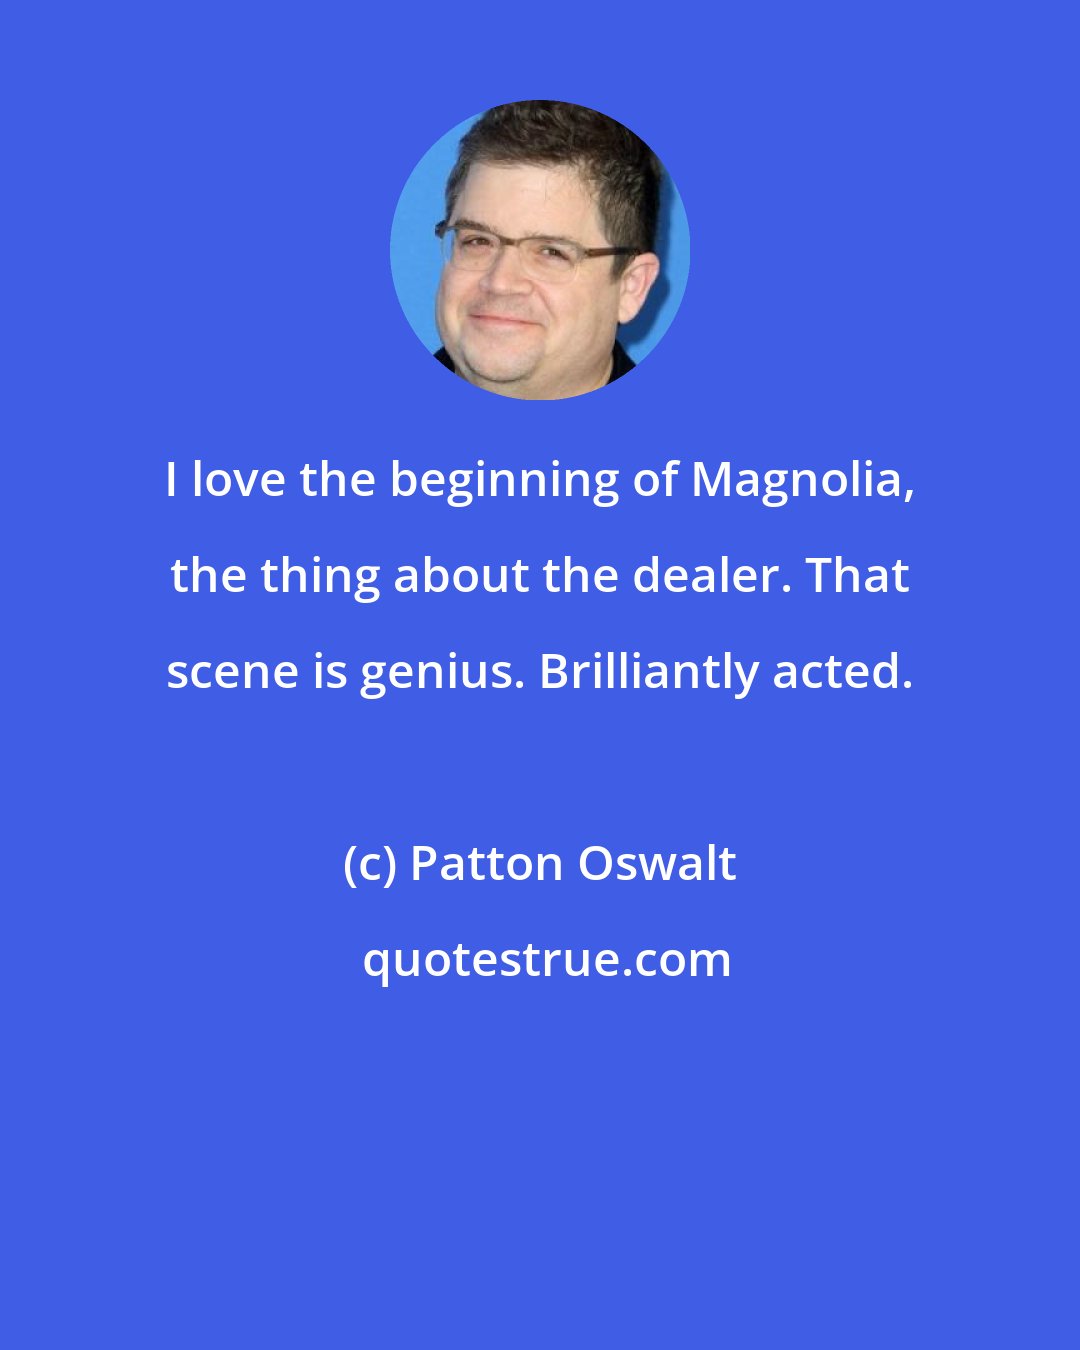 Patton Oswalt: I love the beginning of Magnolia, the thing about the dealer. That scene is genius. Brilliantly acted.